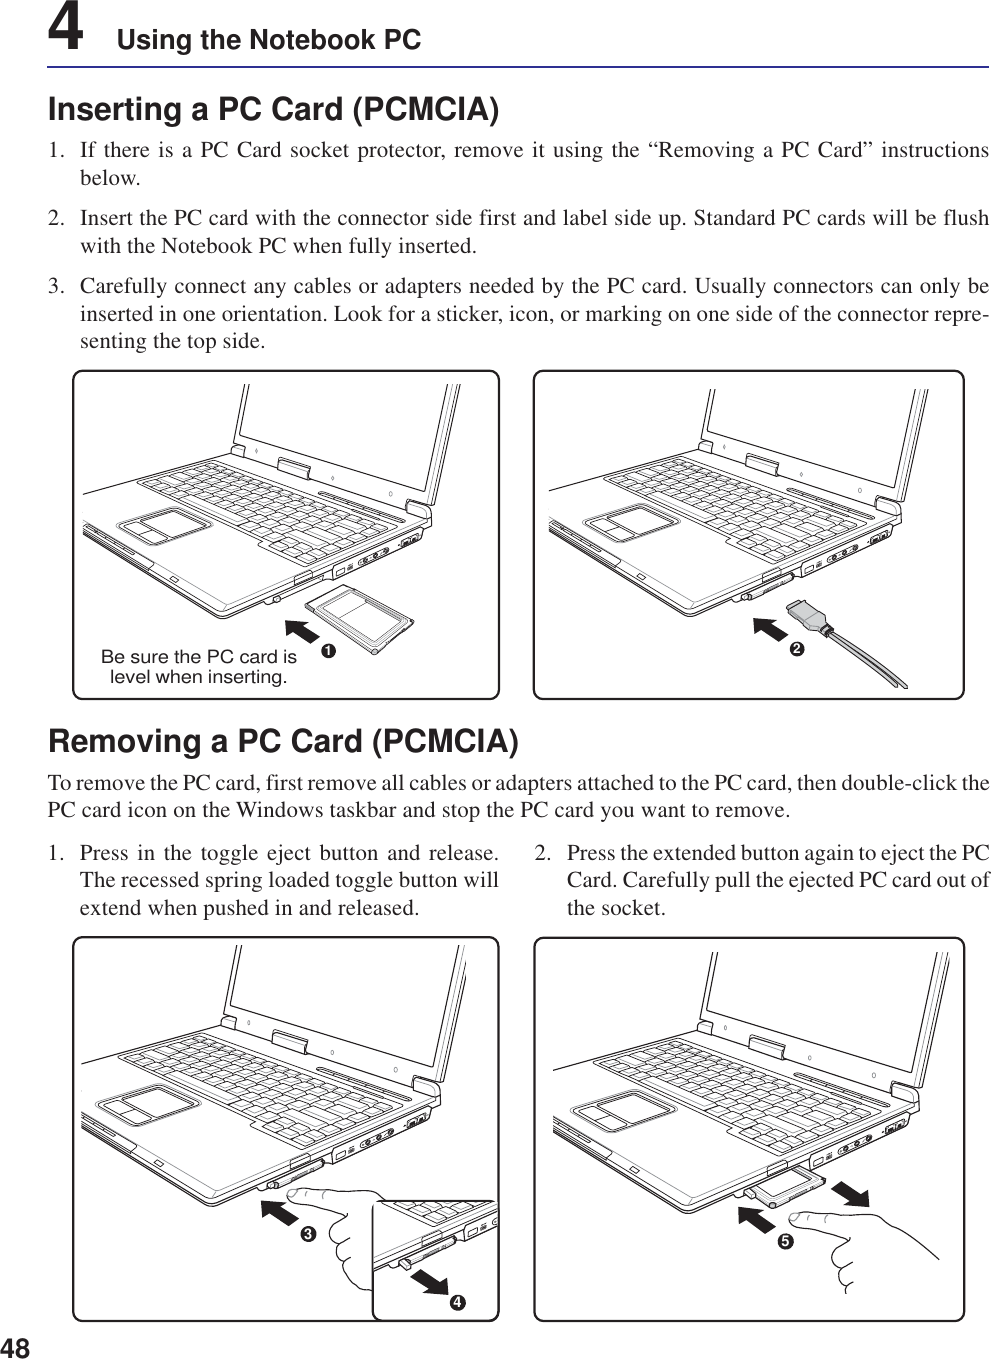 484    Using the Notebook PCInserting a PC Card (PCMCIA)1. If there is a PC Card socket protector, remove it using the “Removing a PC Card” instructionsbelow.2. Insert the PC card with the connector side first and label side up. Standard PC cards will be flushwith the Notebook PC when fully inserted.3. Carefully connect any cables or adapters needed by the PC card. Usually connectors can only beinserted in one orientation. Look for a sticker, icon, or marking on one side of the connector repre-senting the top side.1. Press in the toggle eject button and release.The recessed spring loaded toggle button willextend when pushed in and released.2. Press the extended button again to eject the PCCard. Carefully pull the ejected PC card out ofthe socket.Removing a PC Card (PCMCIA)To remove the PC card, first remove all cables or adapters attached to the PC card, then double-click thePC card icon on the Windows taskbar and stop the PC card you want to remove.5341Be sure the PC card islevel when inserting.2